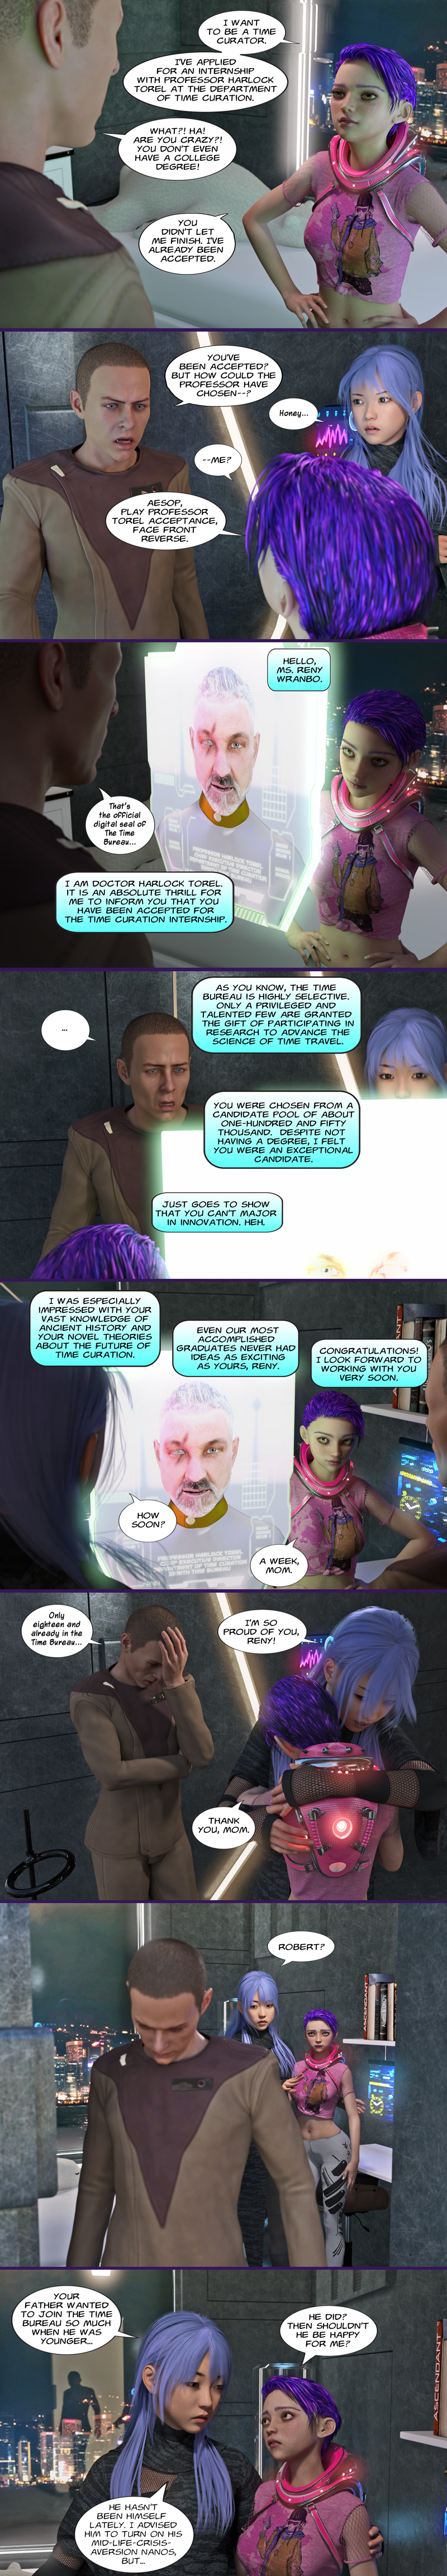 Chapter 19, page 3 – the internship